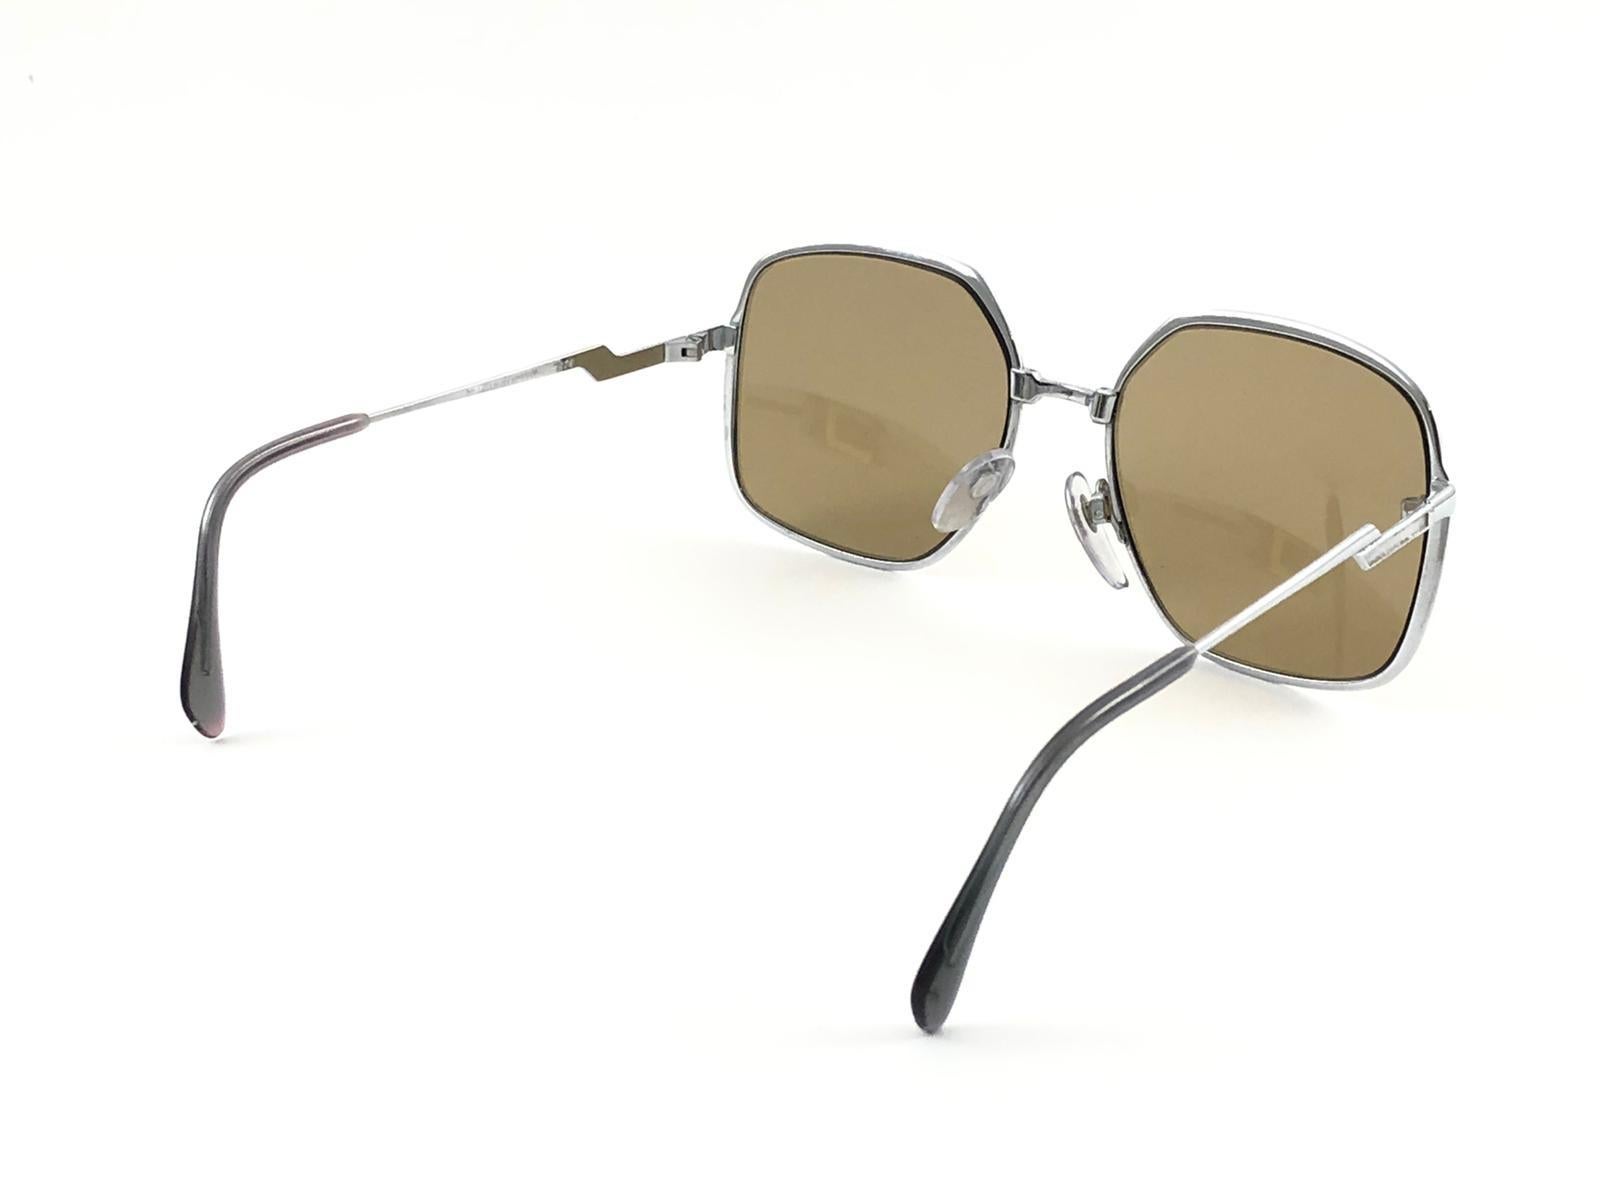 New Vintage Metzler Zeiss 1870 Umbramatic Sunglasses West Germany 80's For Sale 1